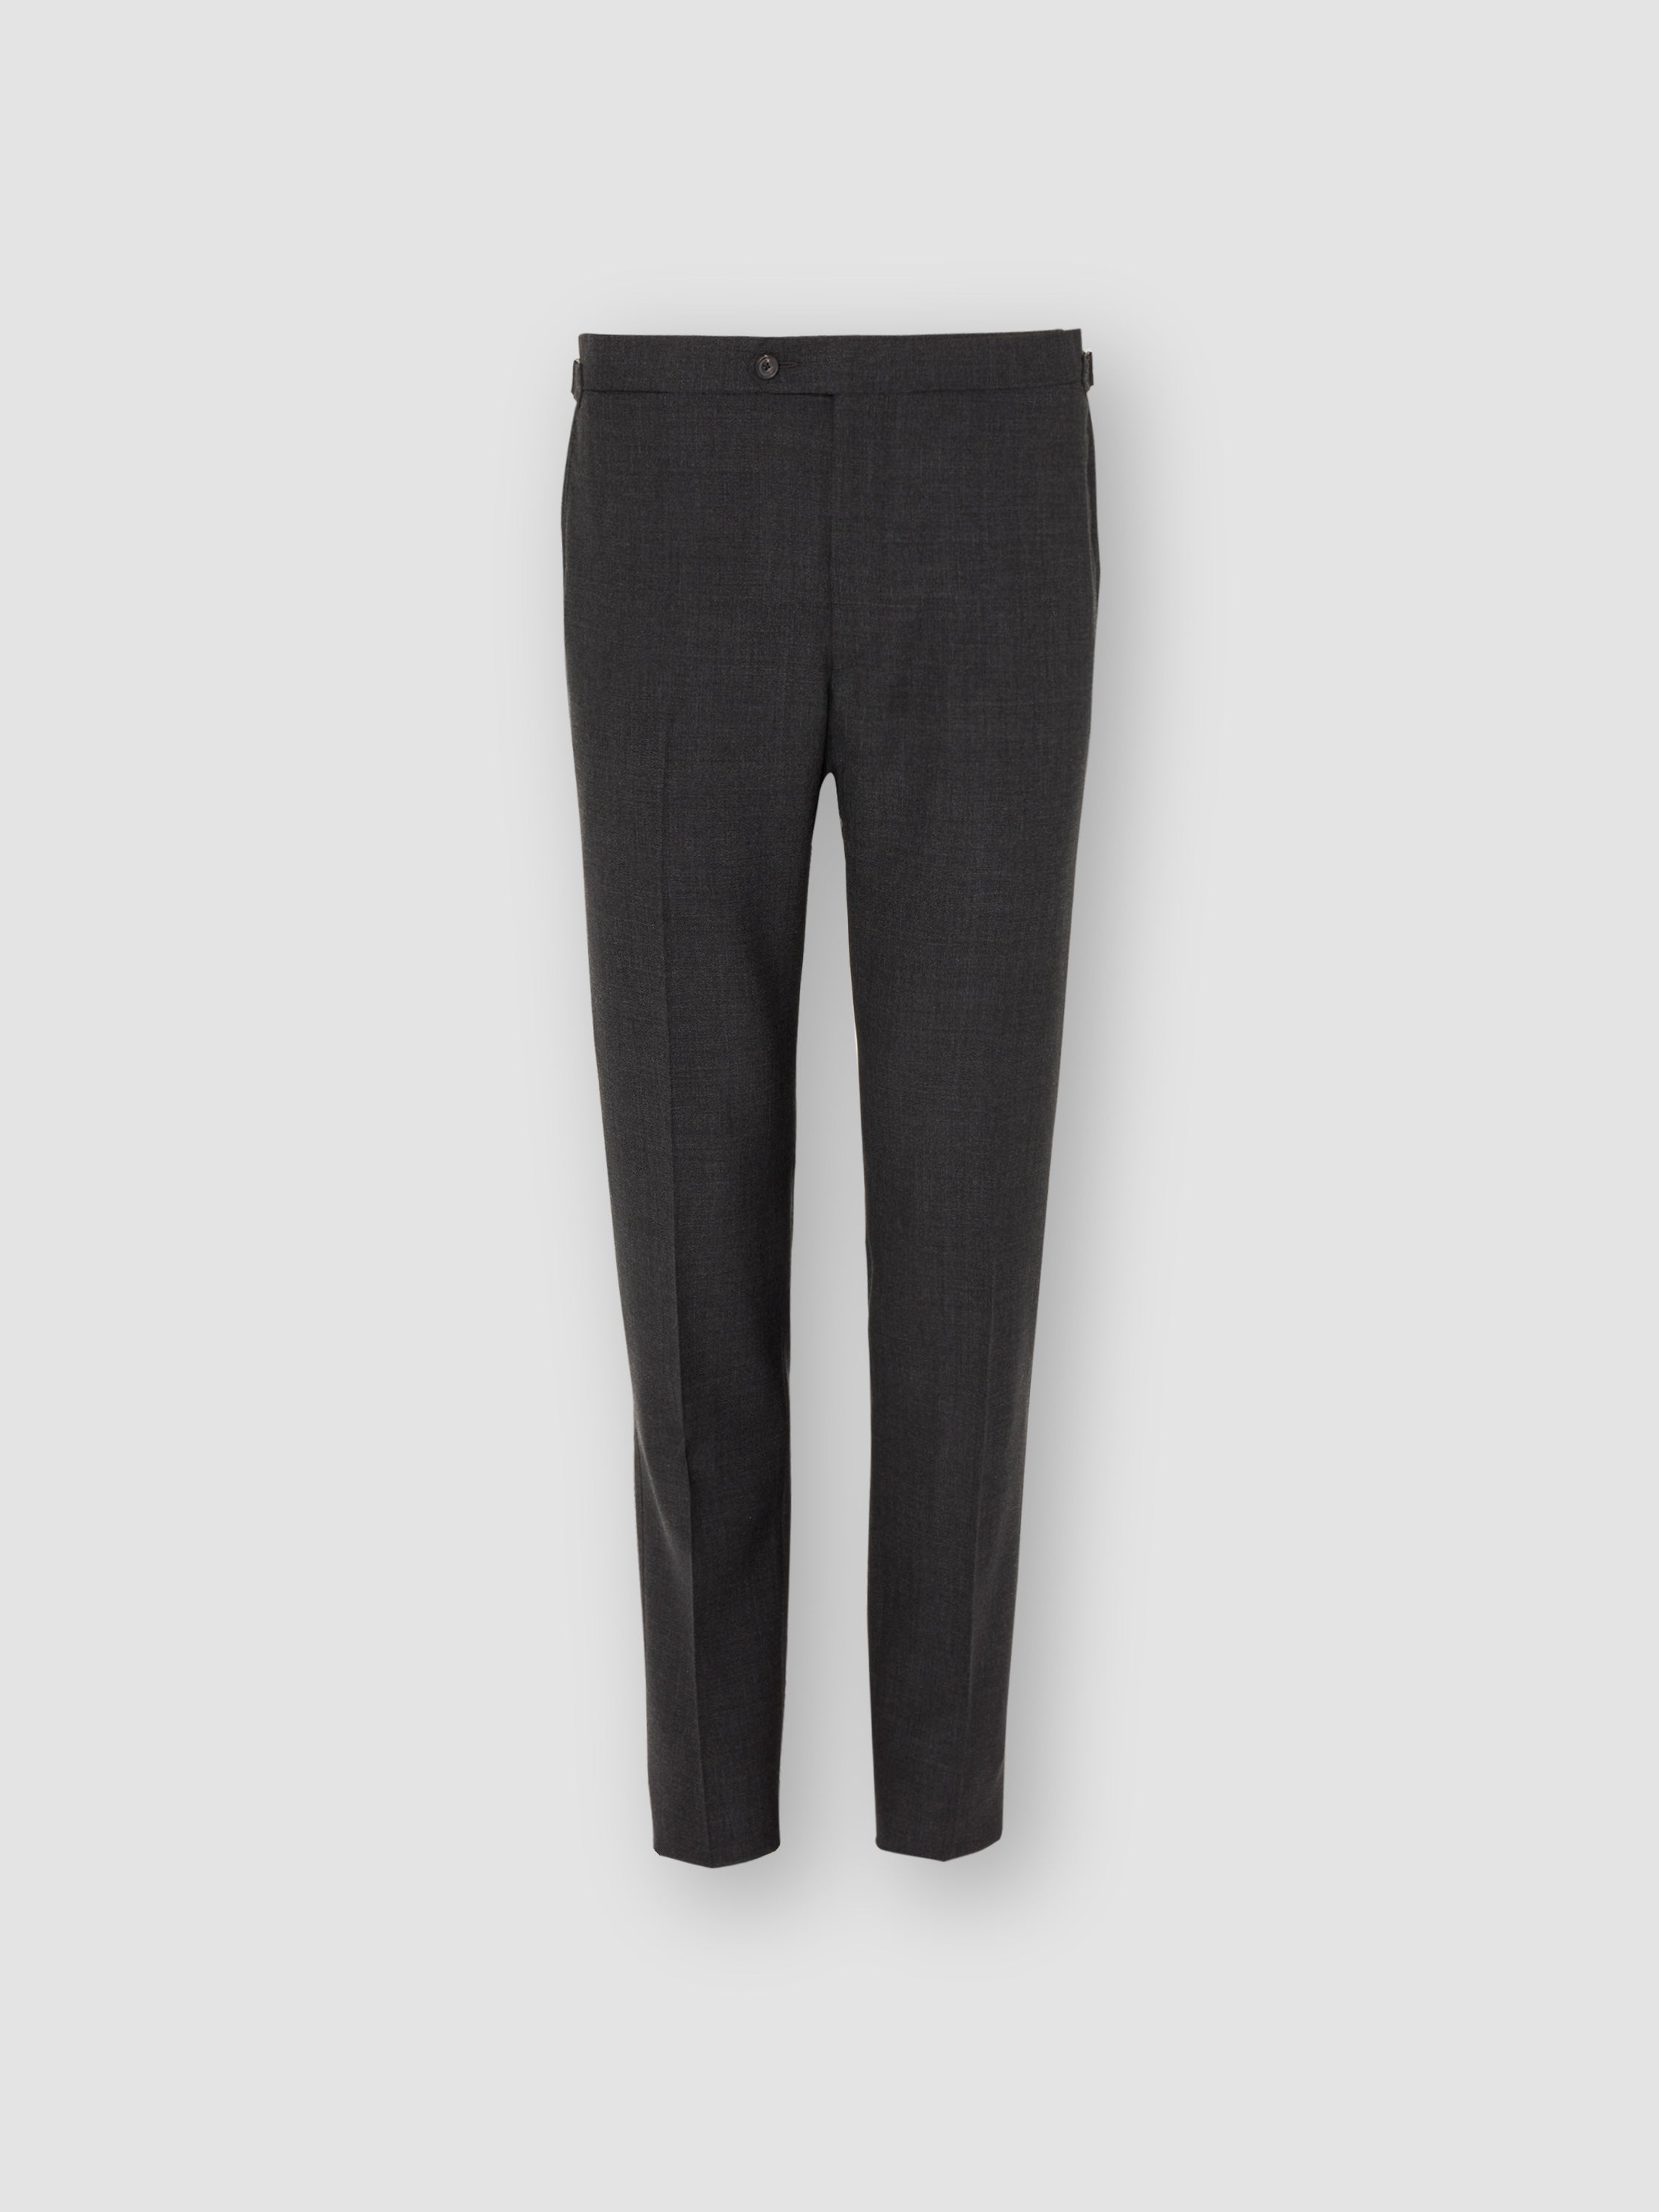 Fresco Tailored Trousers Grey Product Image